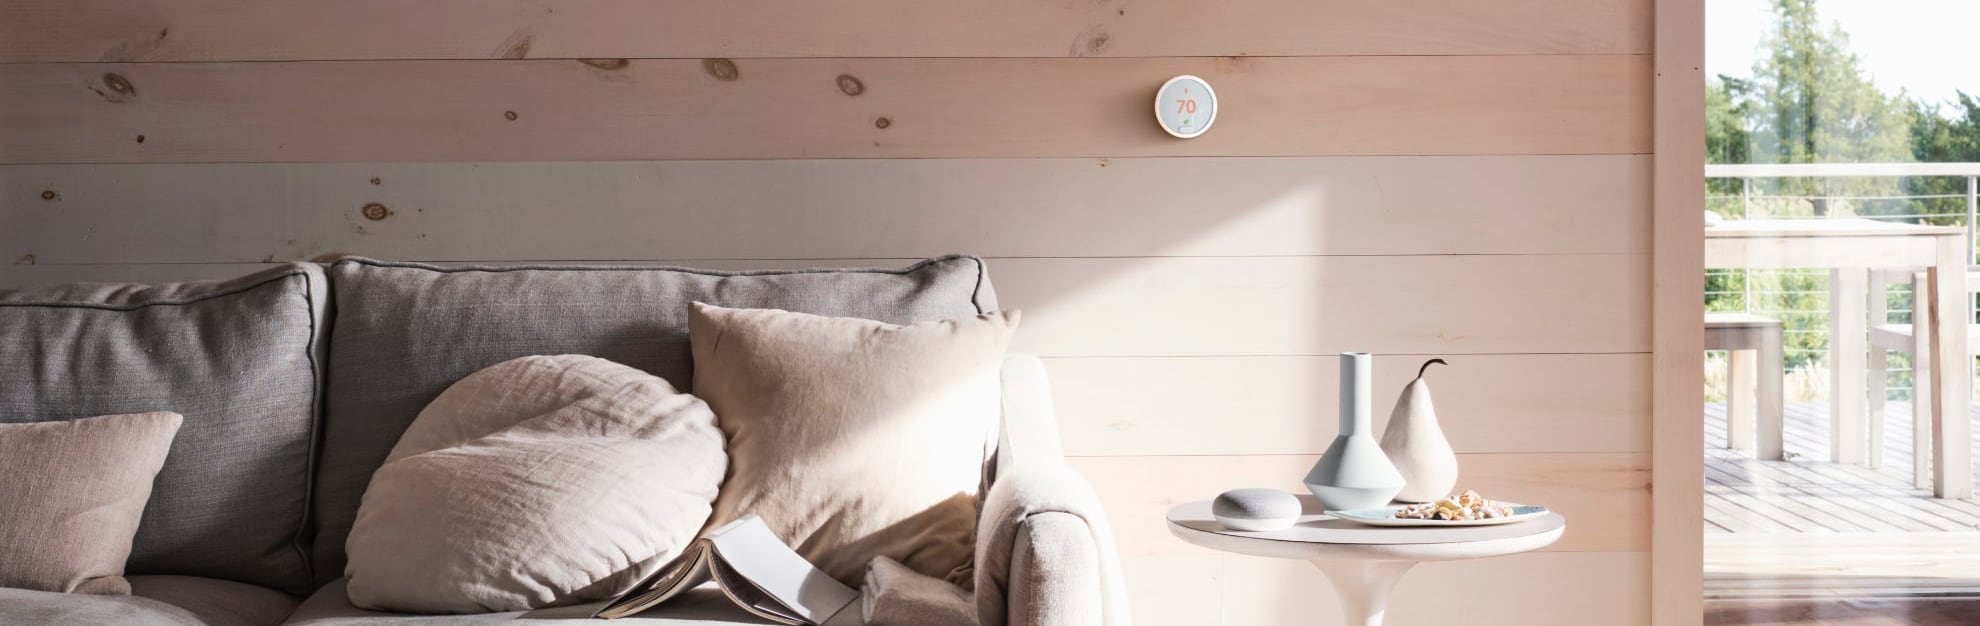 Vivint Home Automation in Rockford